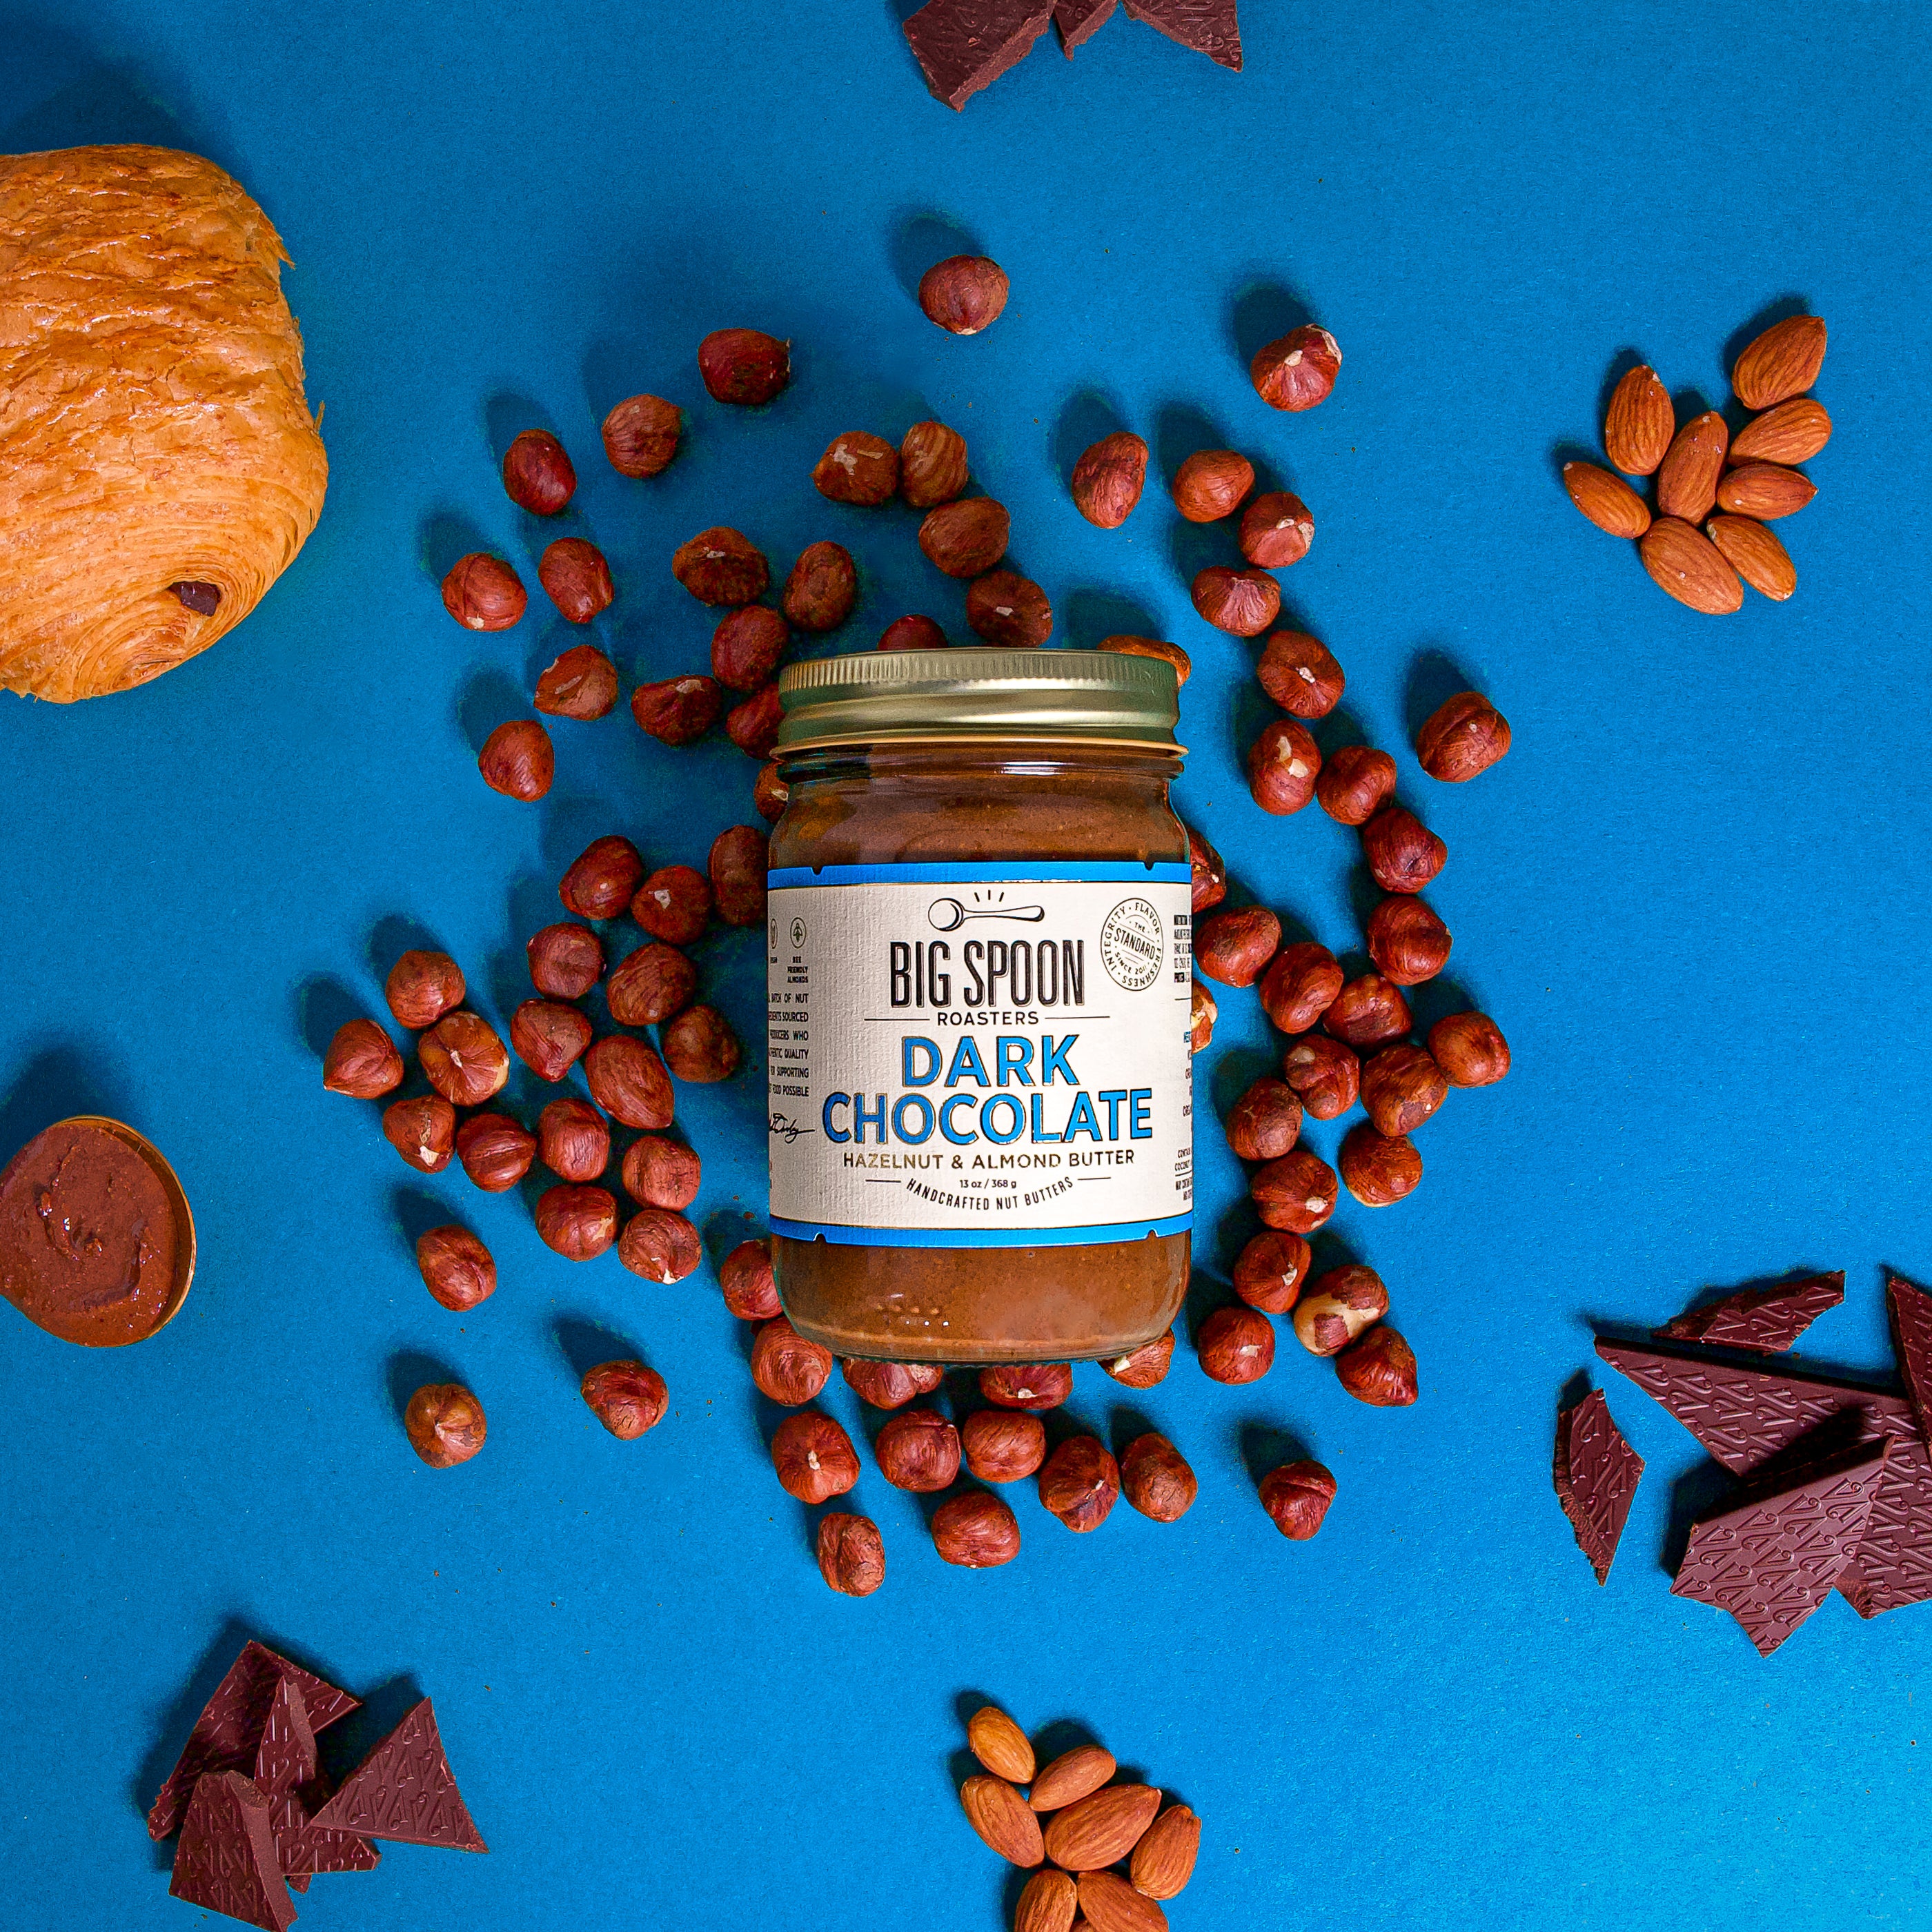 Back for a Limited Time: Dark Chocolate Hazelnut & Almond Butter